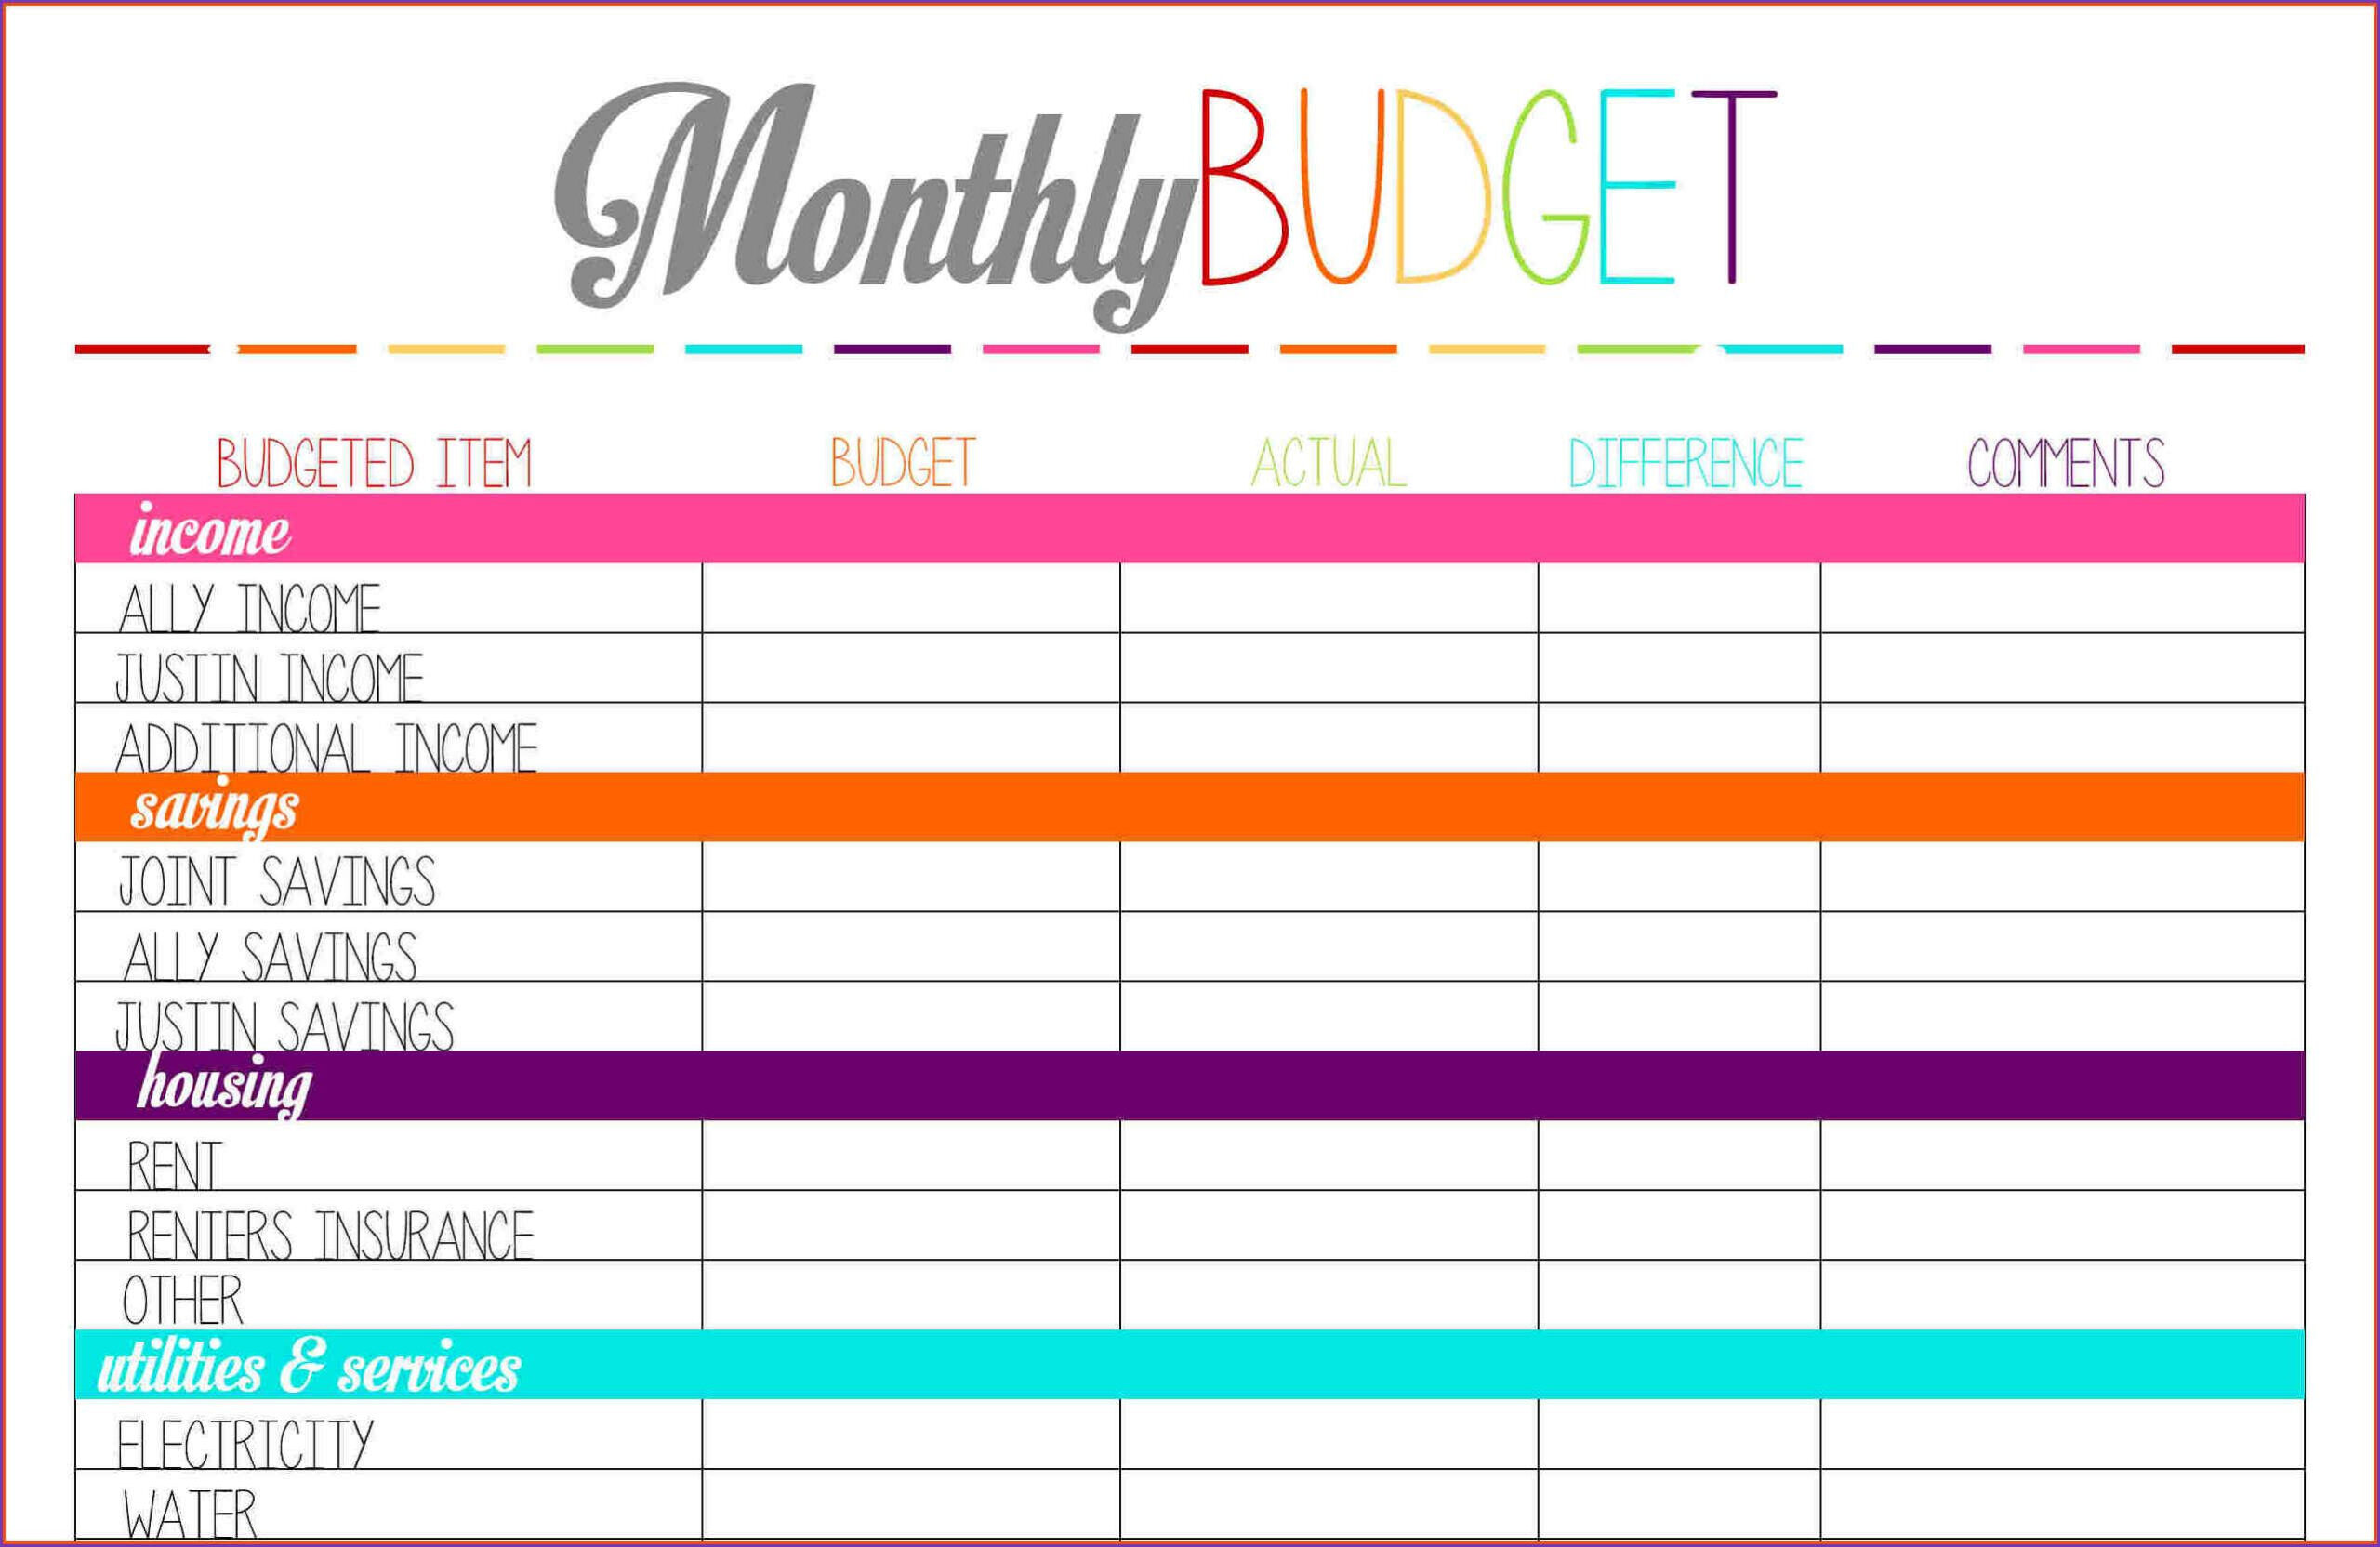 FREE MONTHLY BUDGET TEMPLATE Oninstall Budget Planning Worksheet 